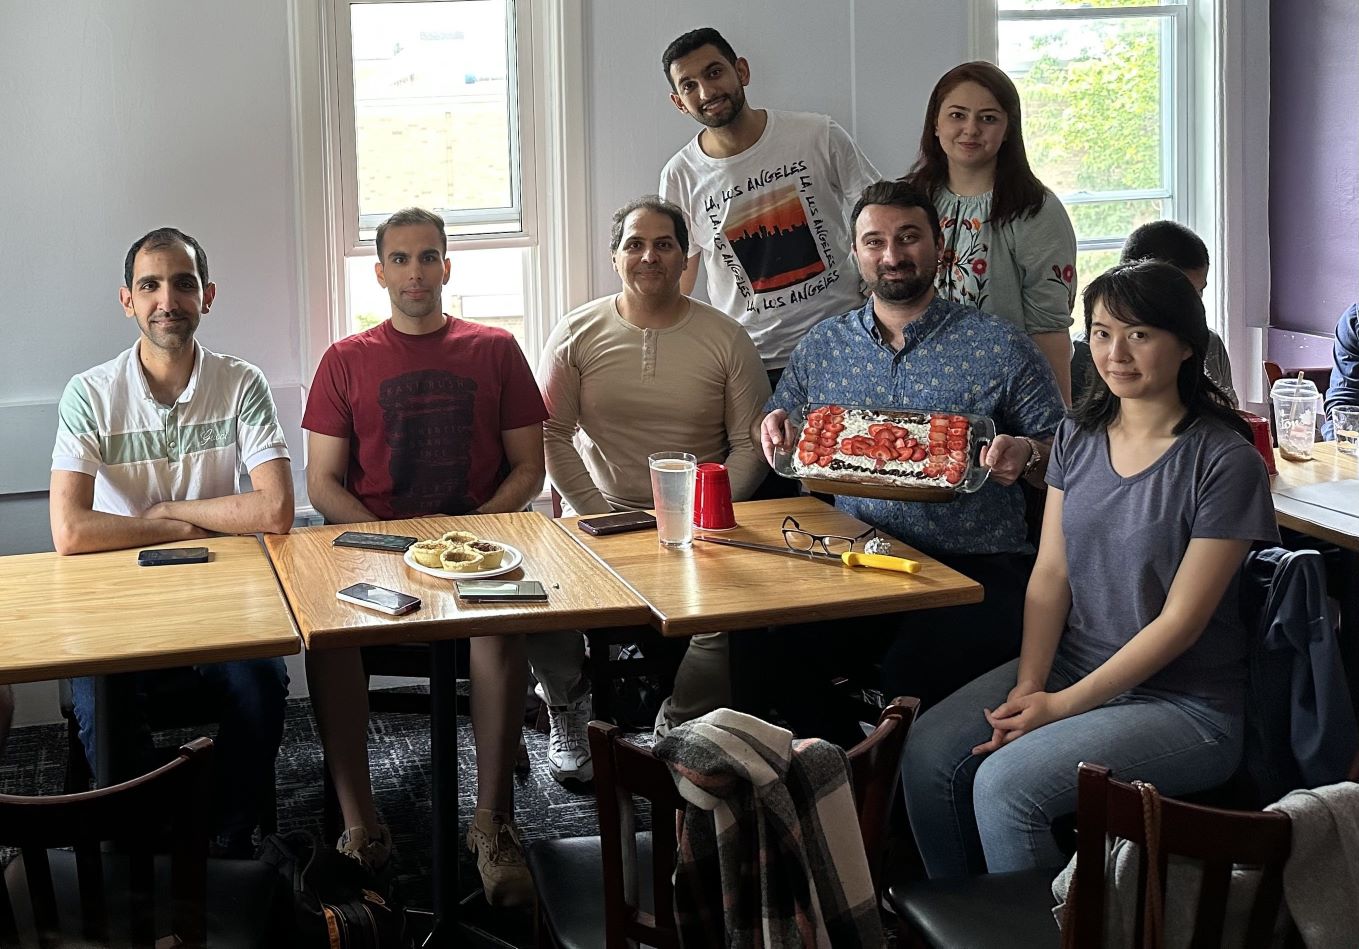 Milad and his graduate students posing with a cake